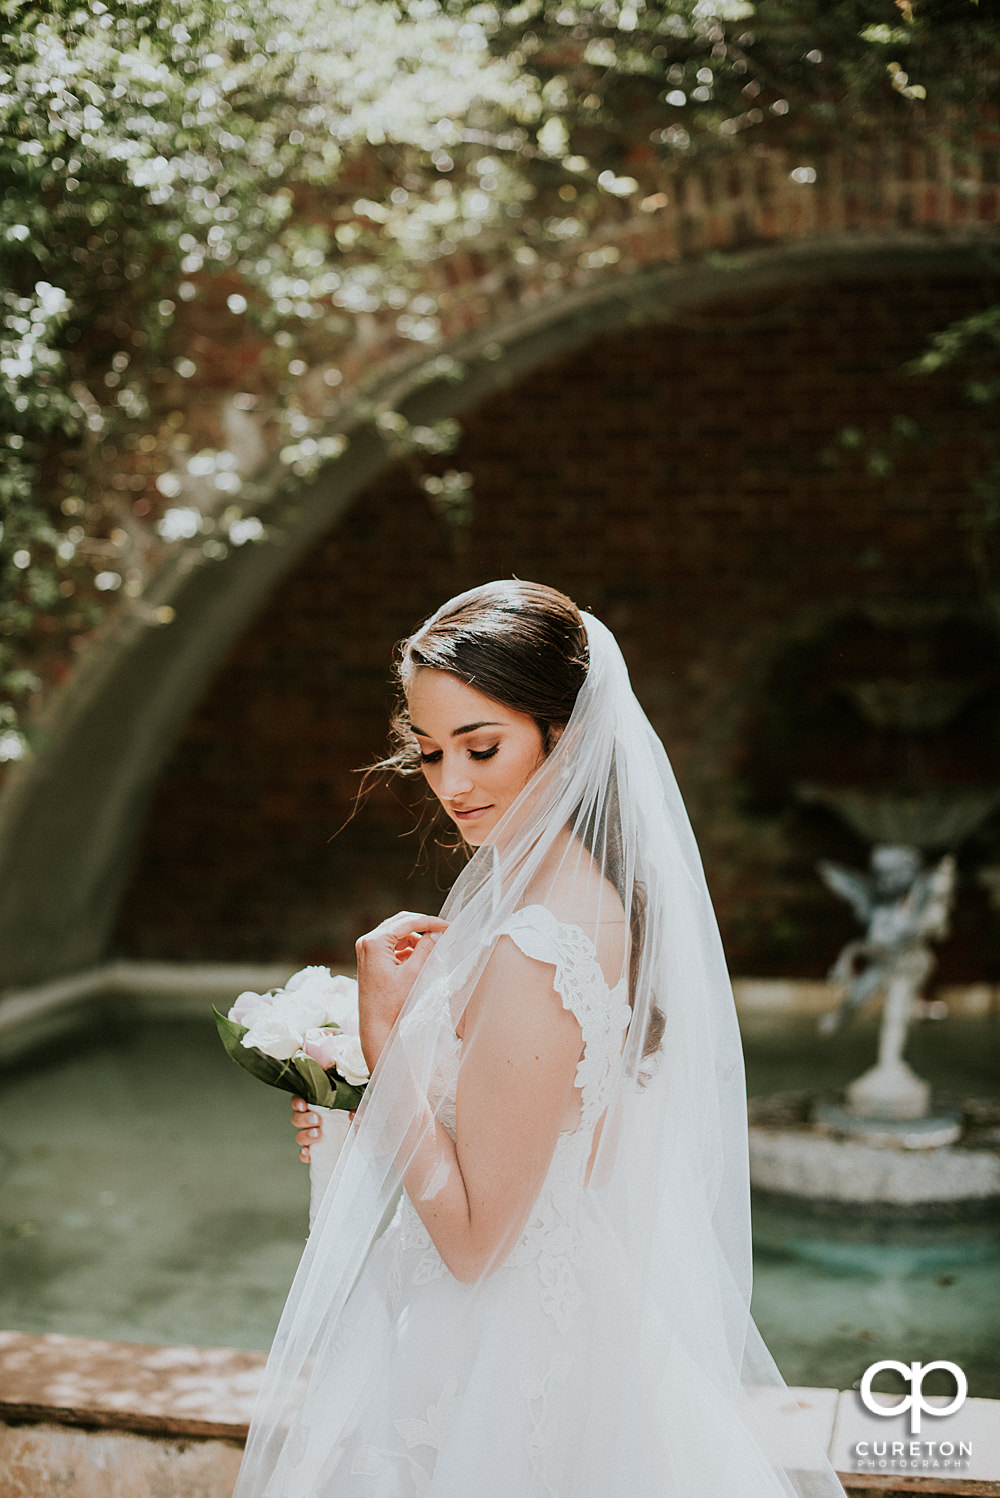 Stunning high fashion bridal at the rose garden on the Furman University campus.